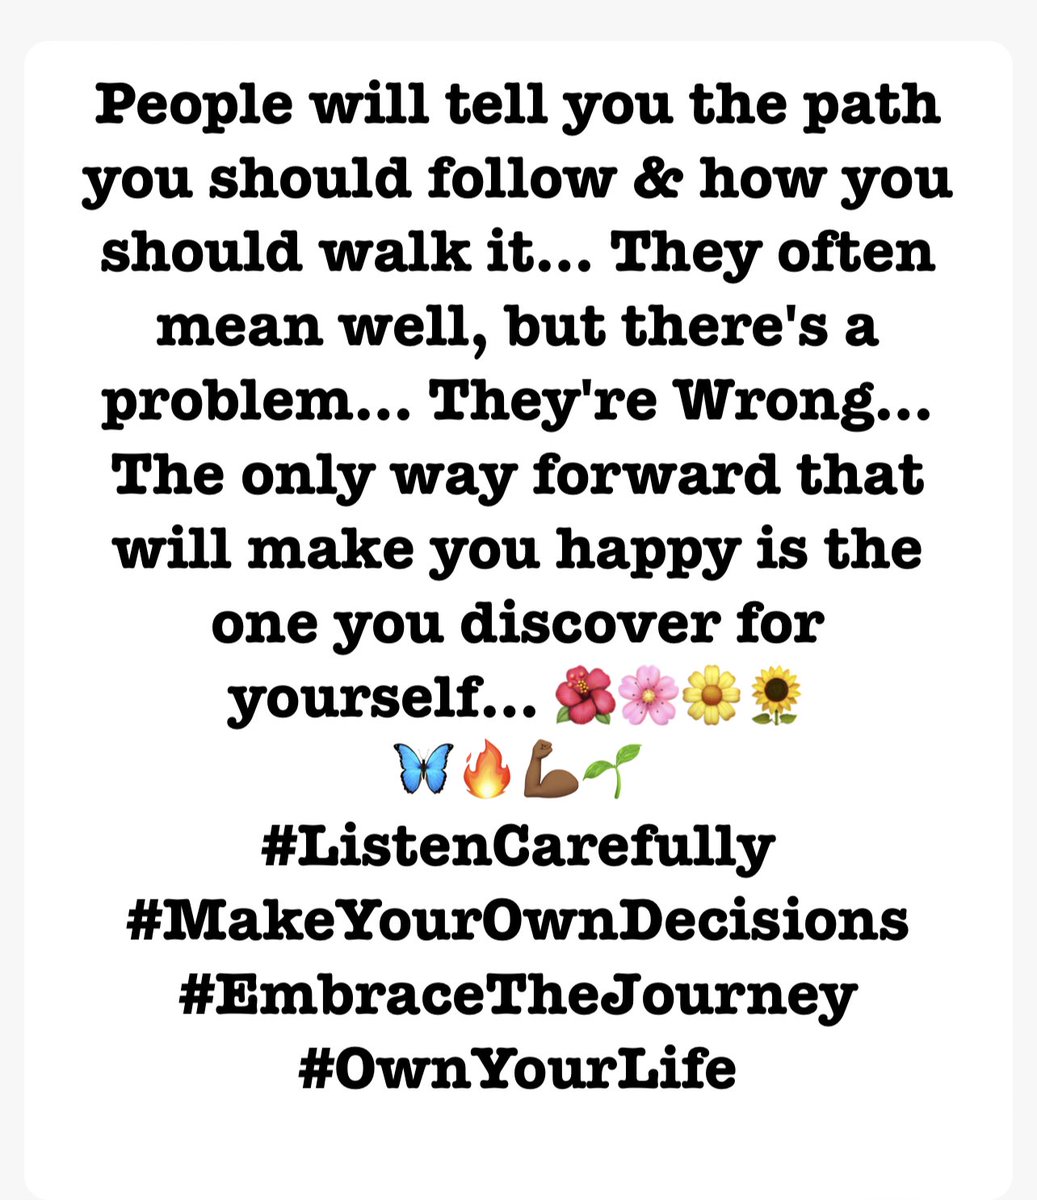 The more you can live the life that feels right, instead of the one you feel is expected from you, the happier you'll be… Always listen to the wise counsel of others, & then make your own decisions…
🦋🔥💪🏾🌱 #ListenCarefully
#MakeYourOwnDecisions
#EmbraceTheJourney
#OwnYourLife